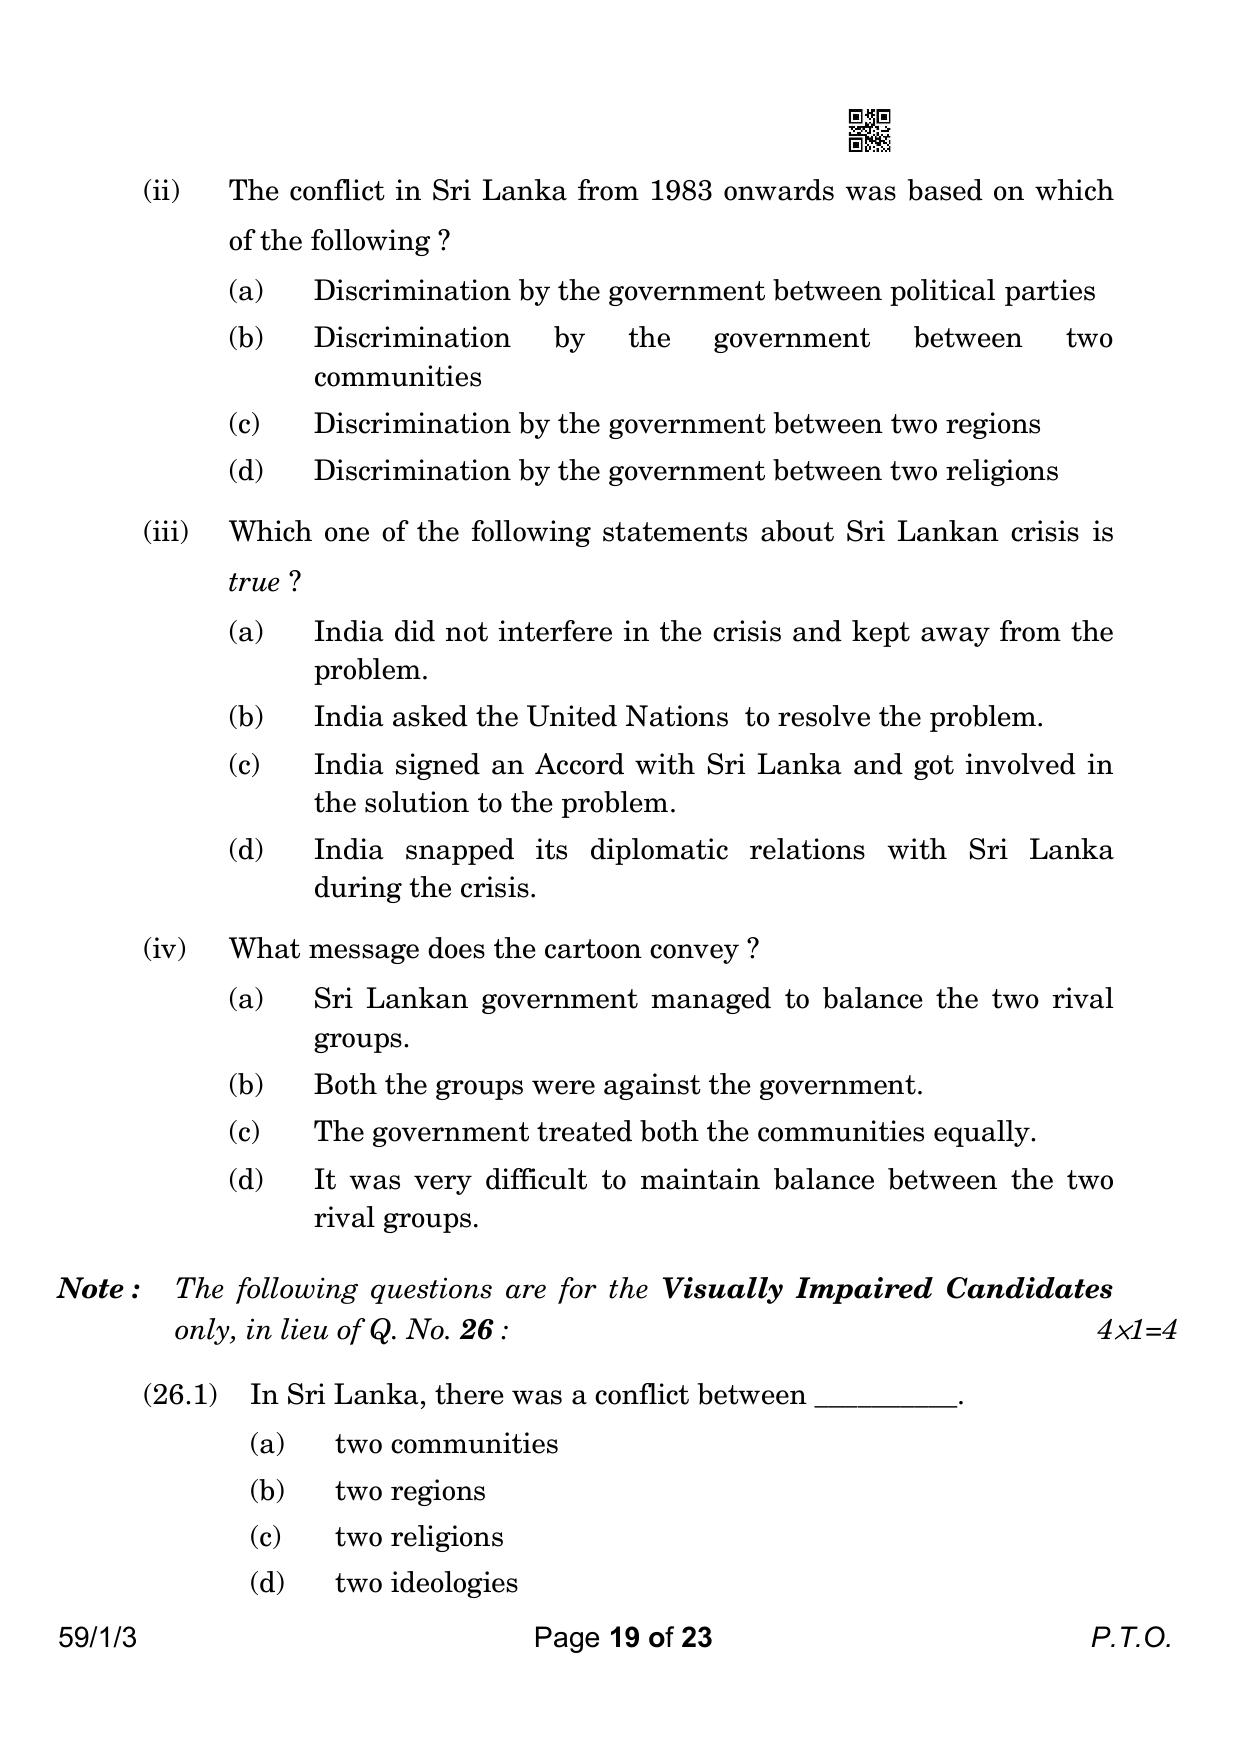 CBSE Class 12 59-1-3 Political Science 2023 Question Paper - Page 19